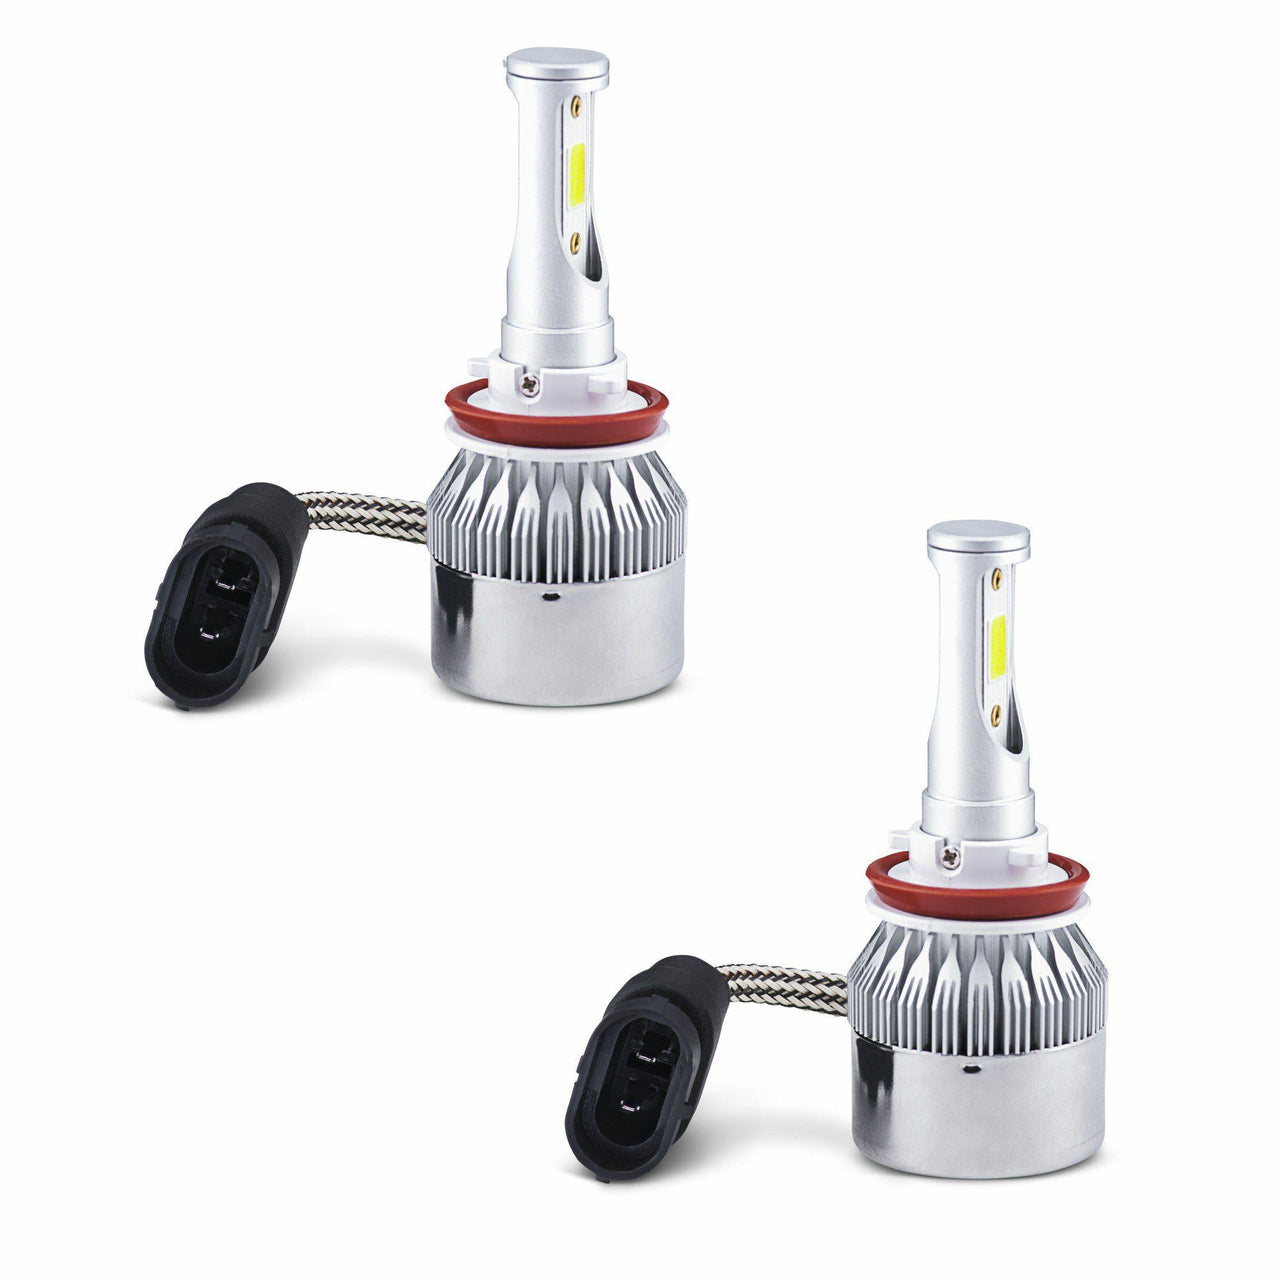 9040 LED Headlight Conversion Kit also known as H10 9045 9145 9140